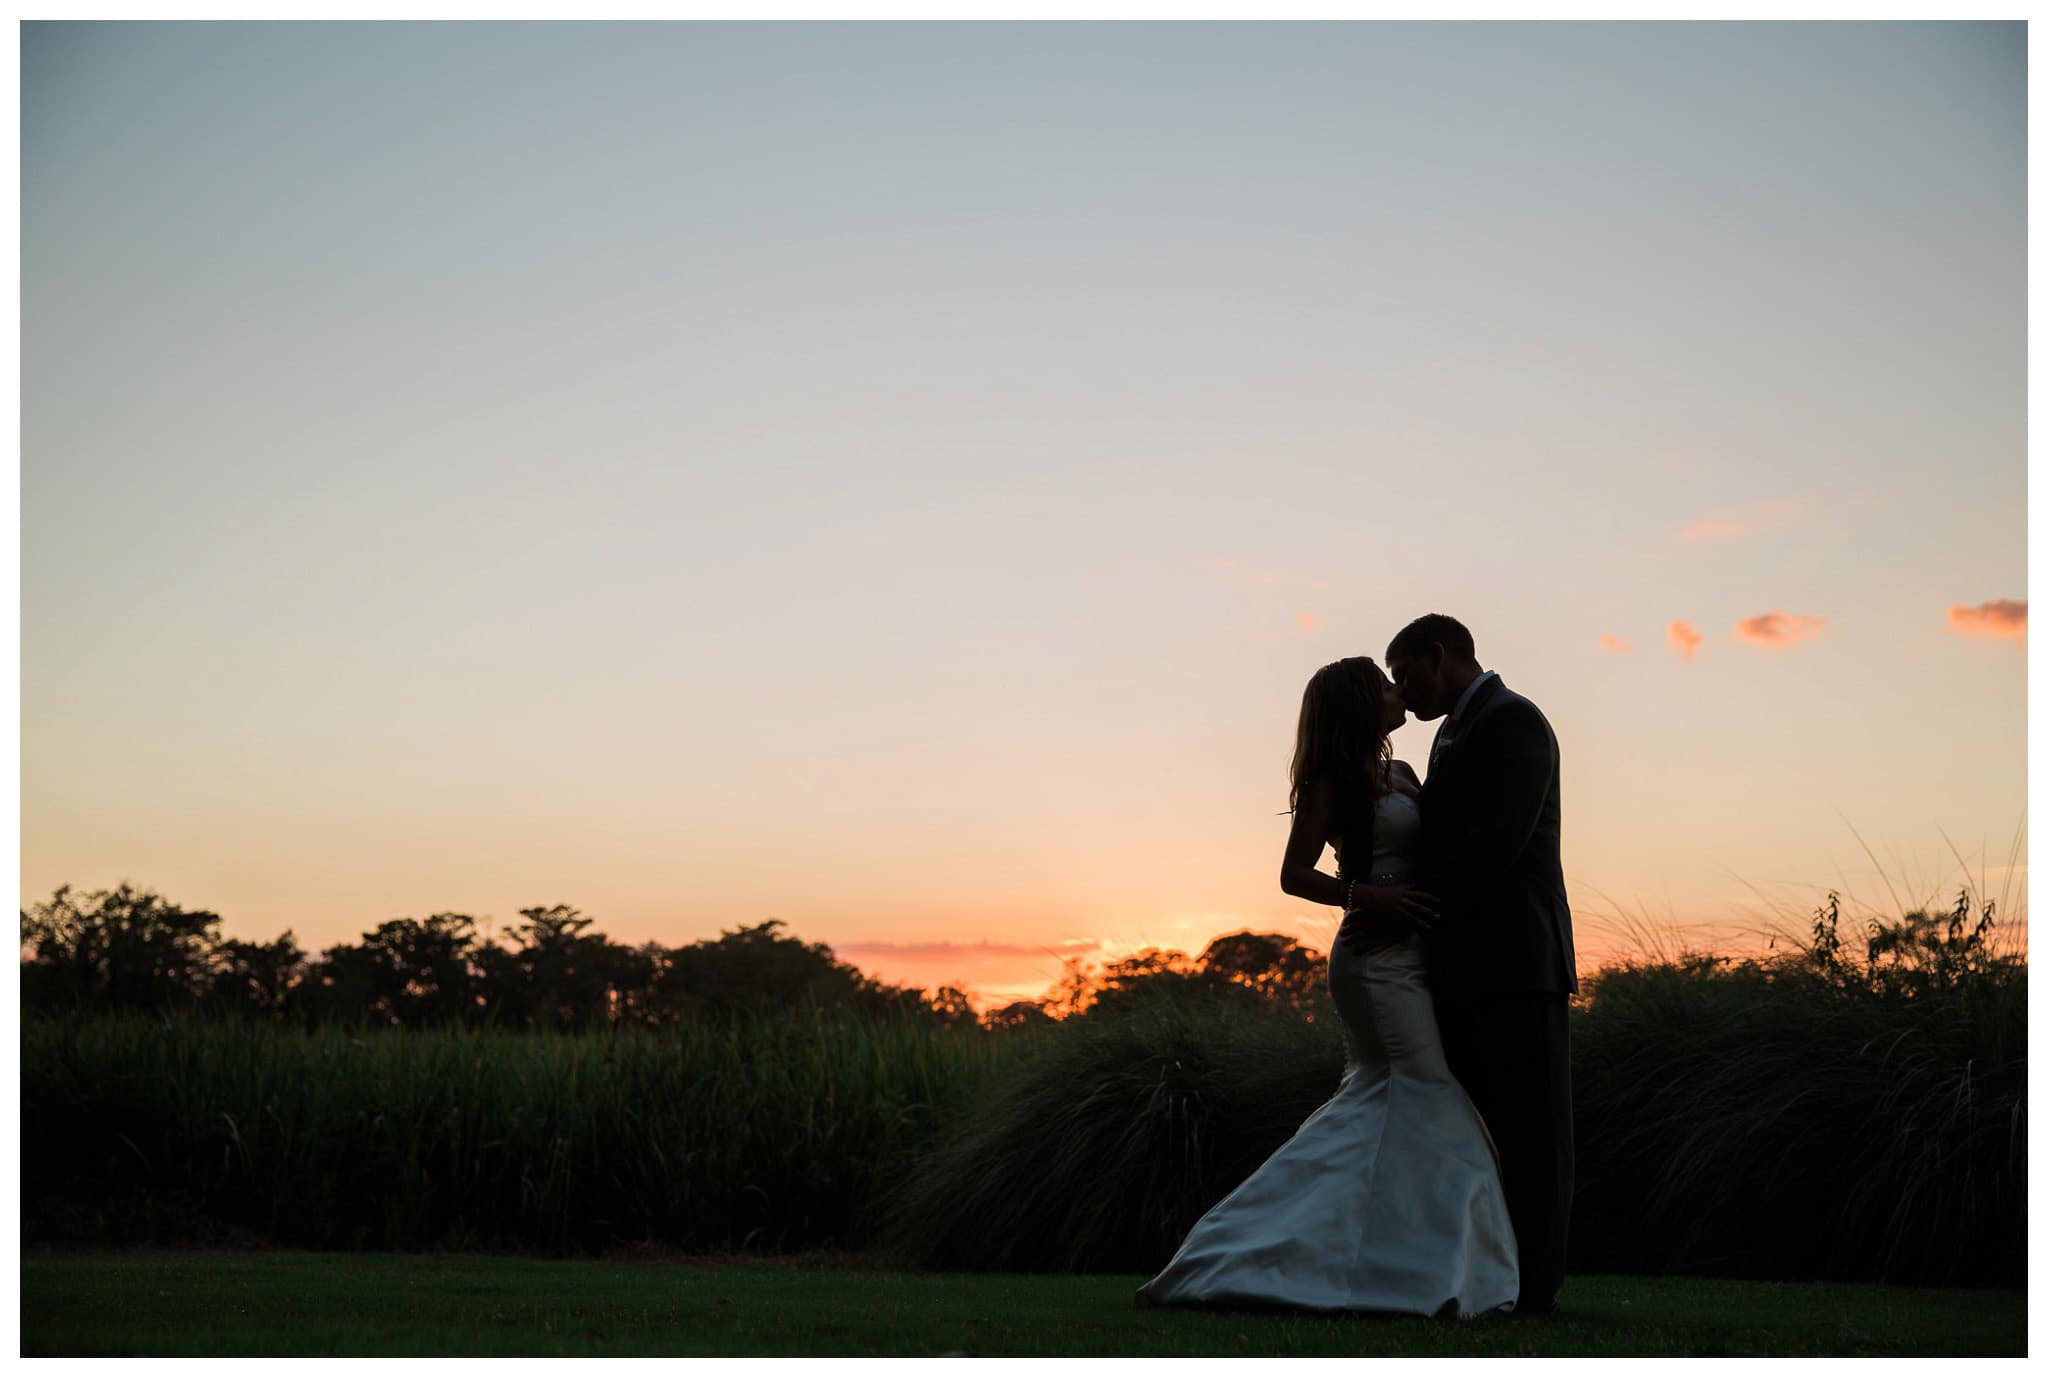 Kay and Josh's kiss during the setting of the sun,  wedding at the Heritage Plantation, Pawleys Island, South Carolina on September 19, 2015 Heritage Plantation Southern wedding, Pawleys Island, South Carolina Venue and Catering: Heritage Club, Pawleys Island Music: Paul Matthews Entertainment Brides dress: The Little White Dress Cake: Buttercream Cakes and Catering Event Rentals: Eventworks Photographer: One Life Photography